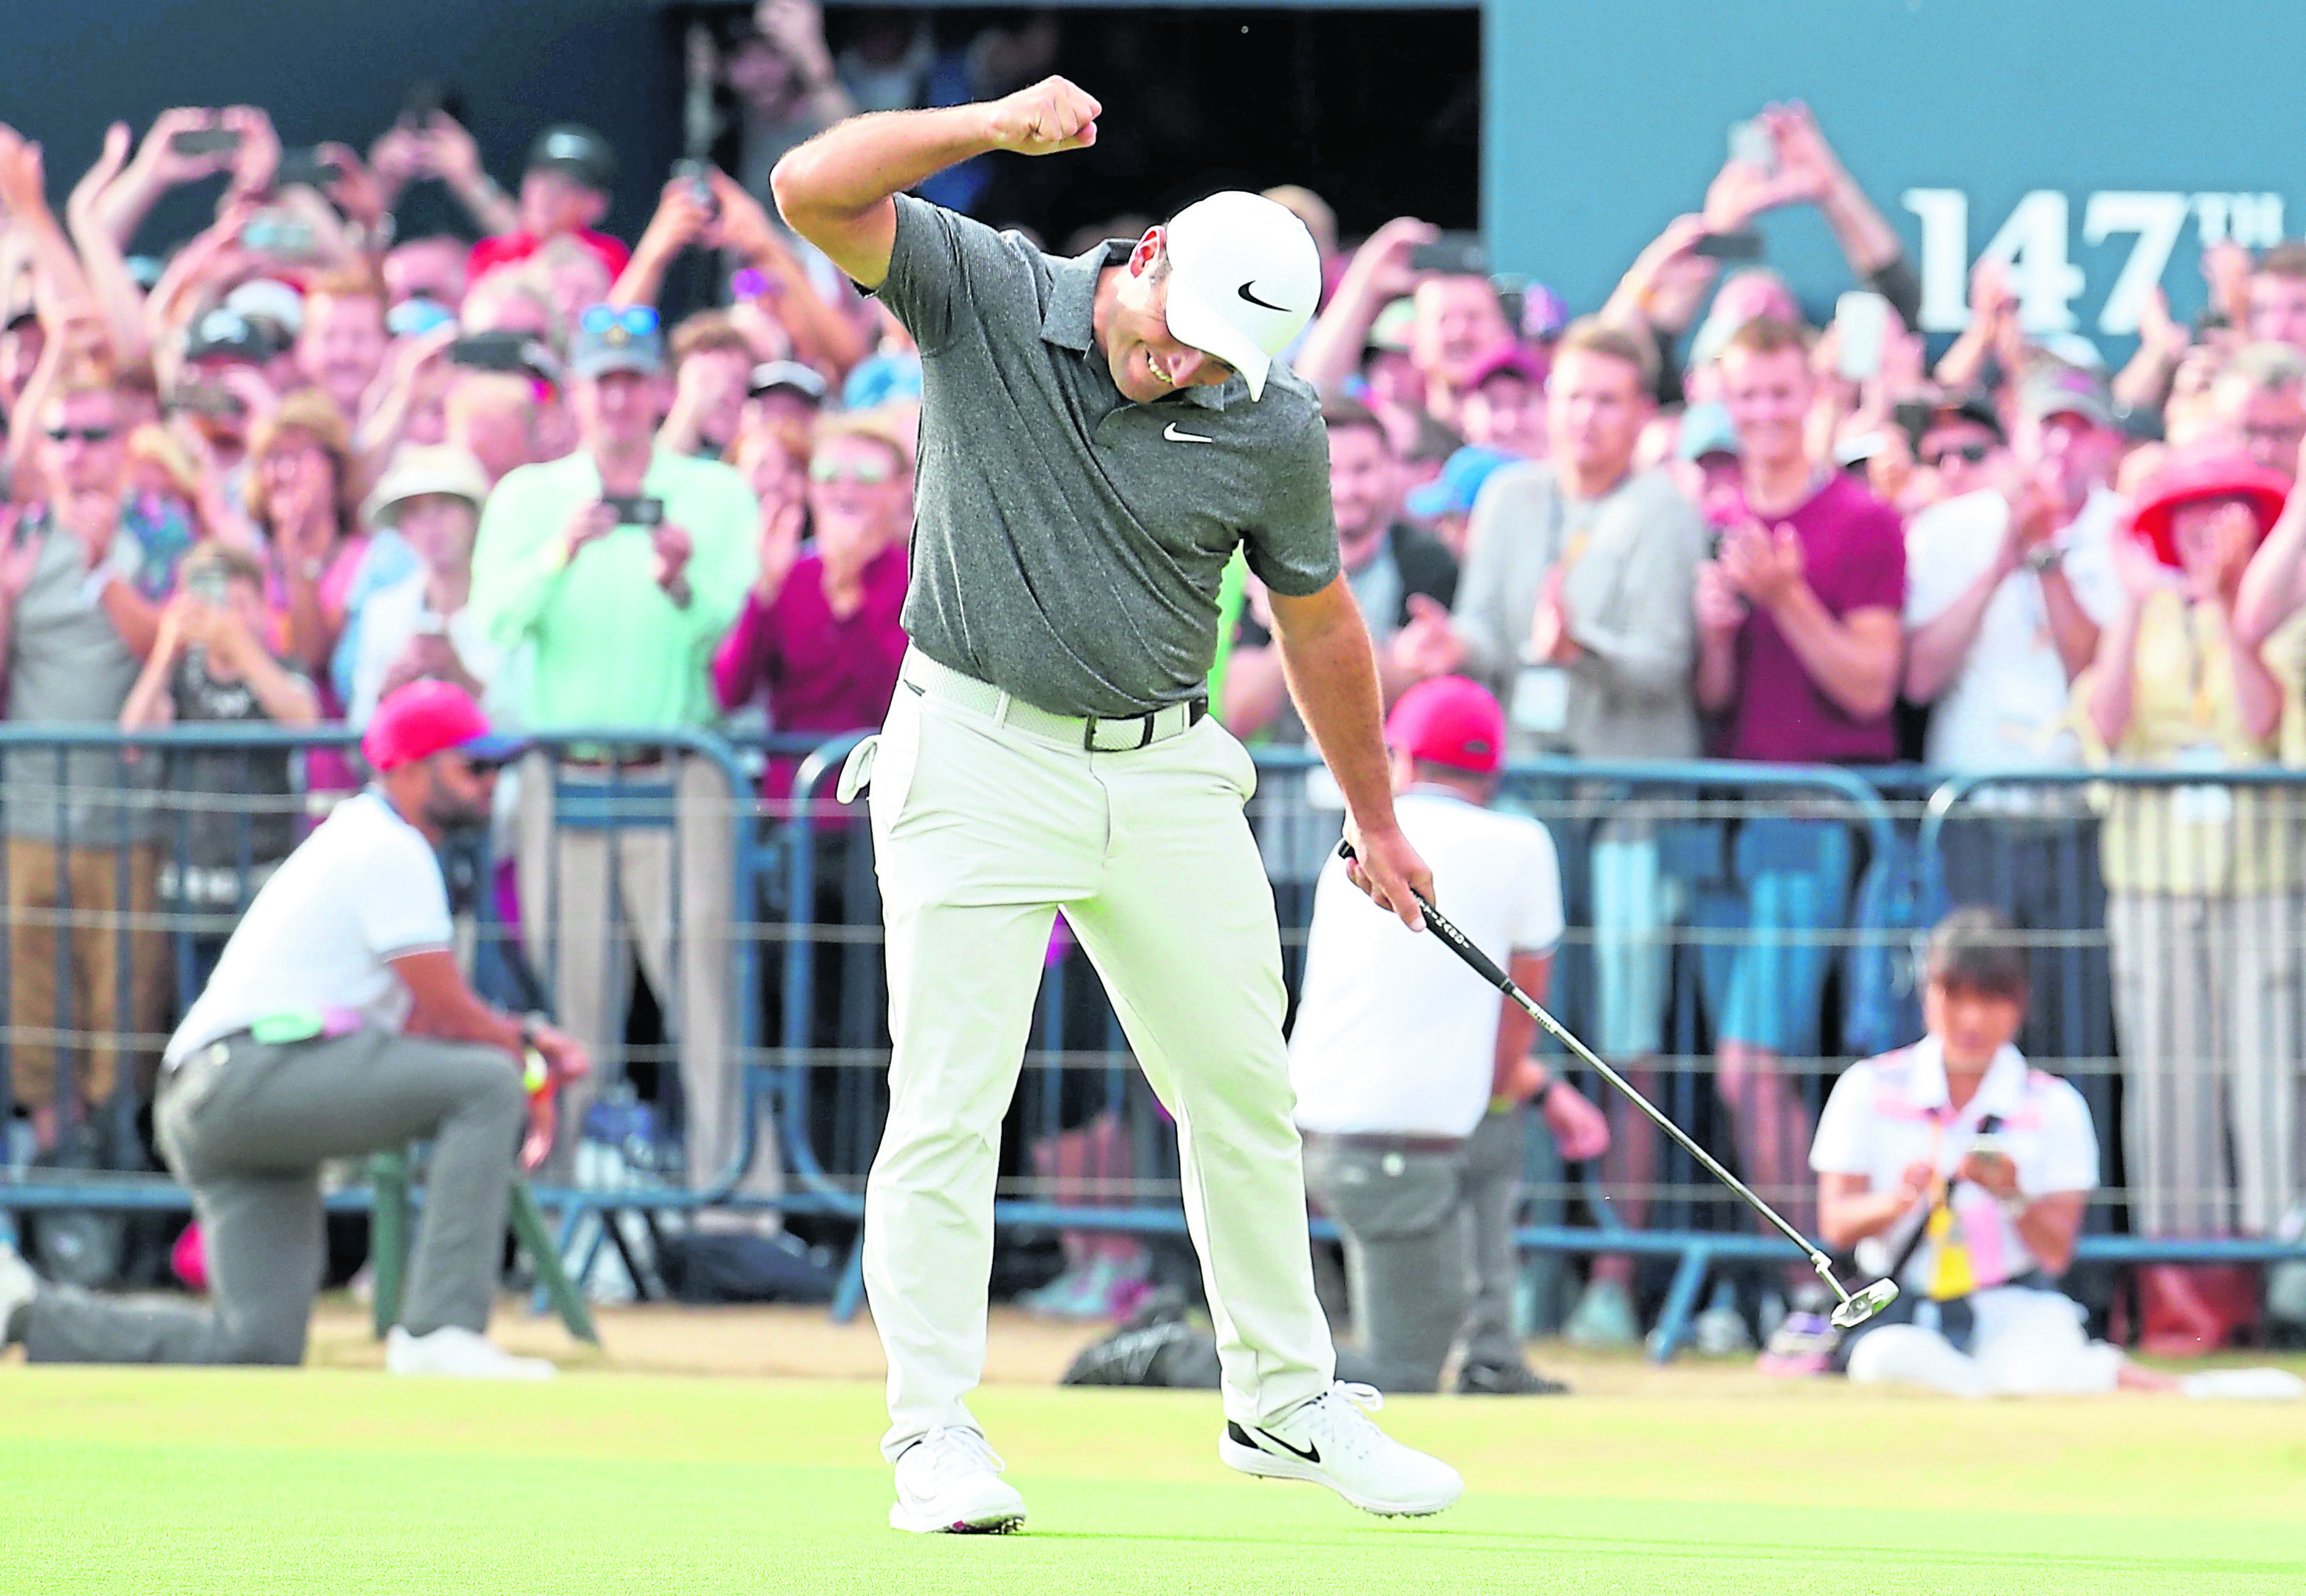 Italy's Francesco Molinari celebrates making a birdie on the 18th during day four of The Open Championship 2018 at Carnoustie Golf Links, Angus.
Photo: Jane Barlow/PA Wire.